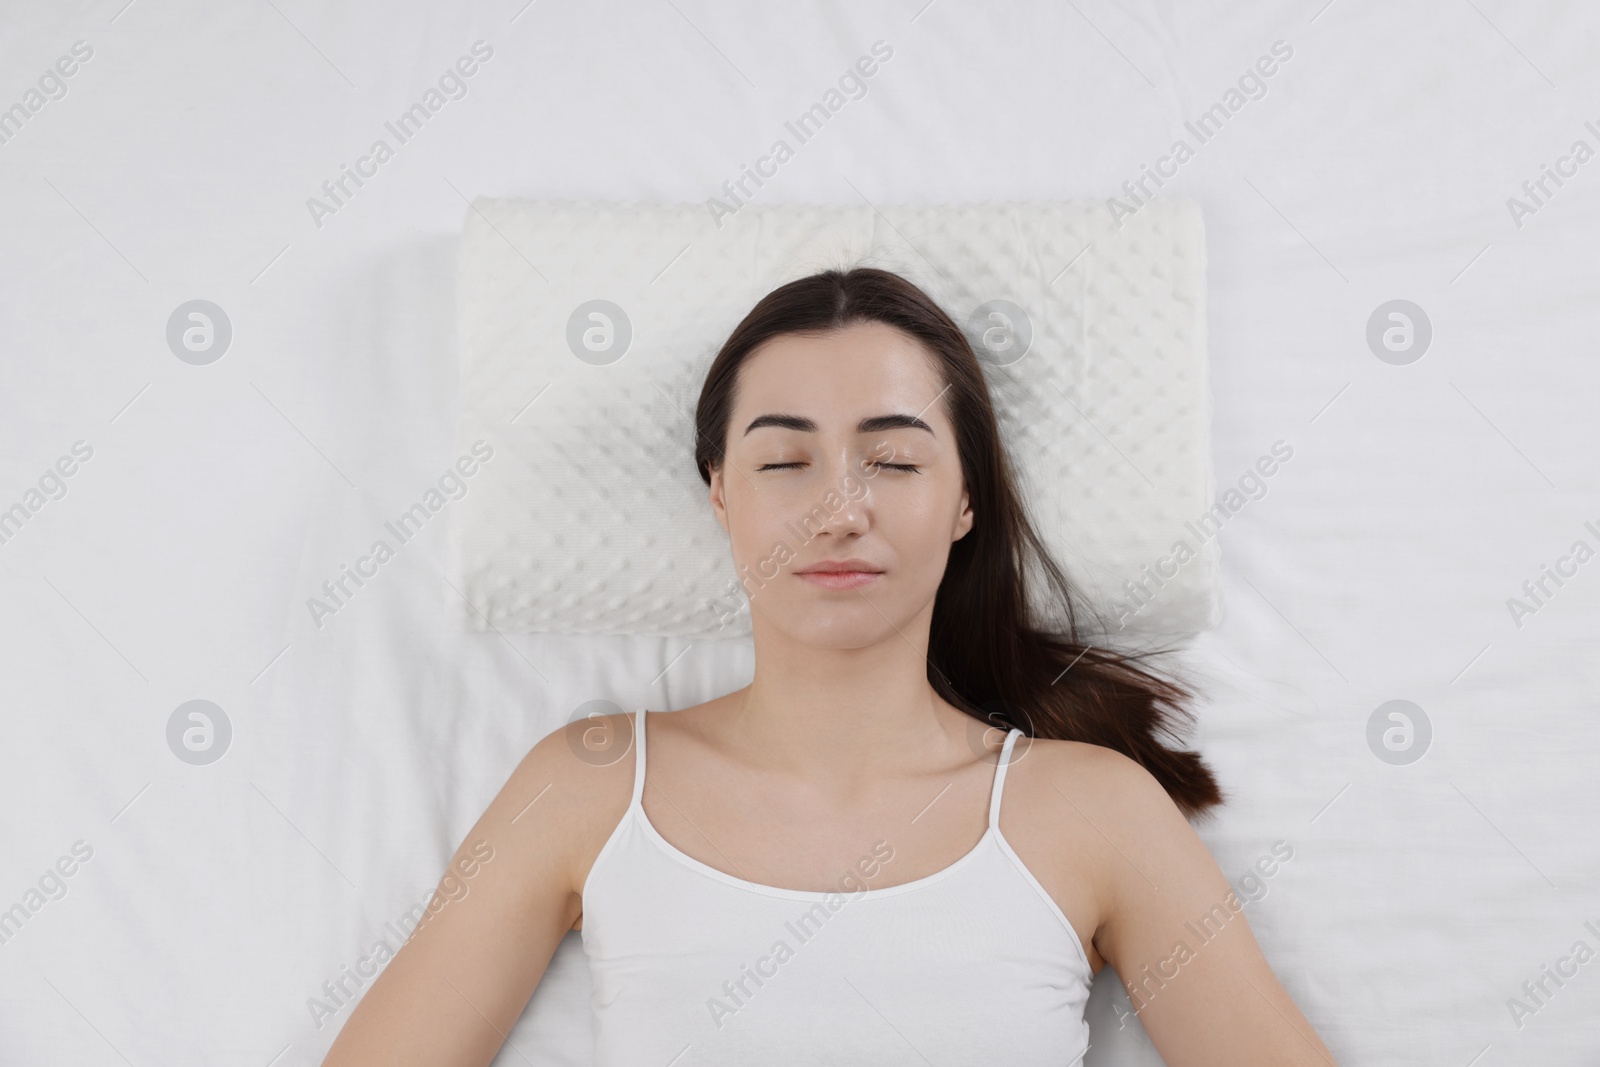 Photo of Woman sleeping on orthopedic pillow in bed, top view